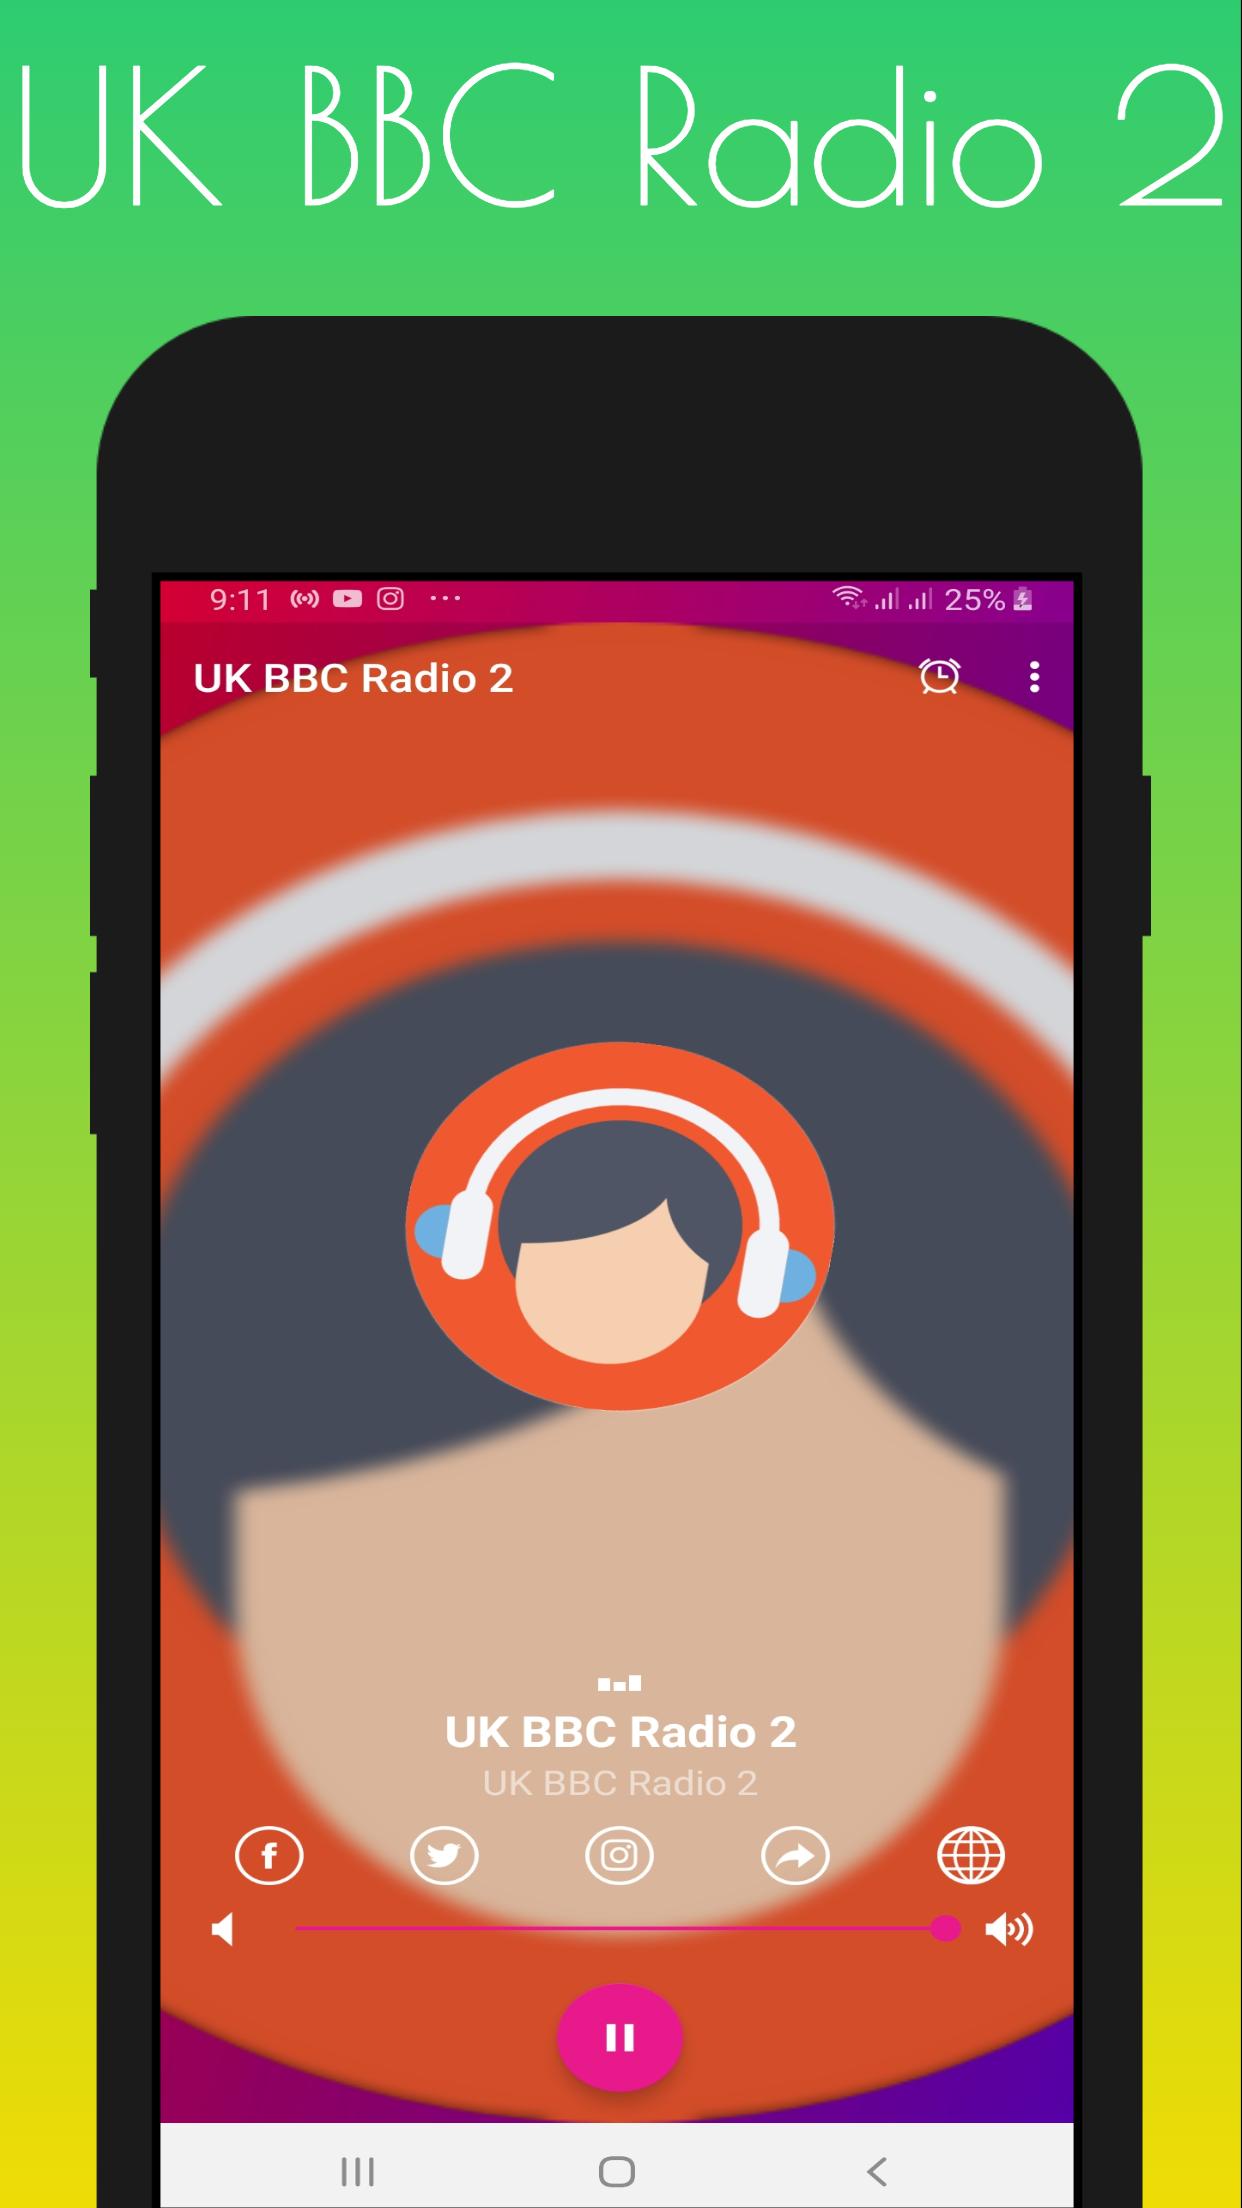 UK BBC Radio 2 for Android - APK Download